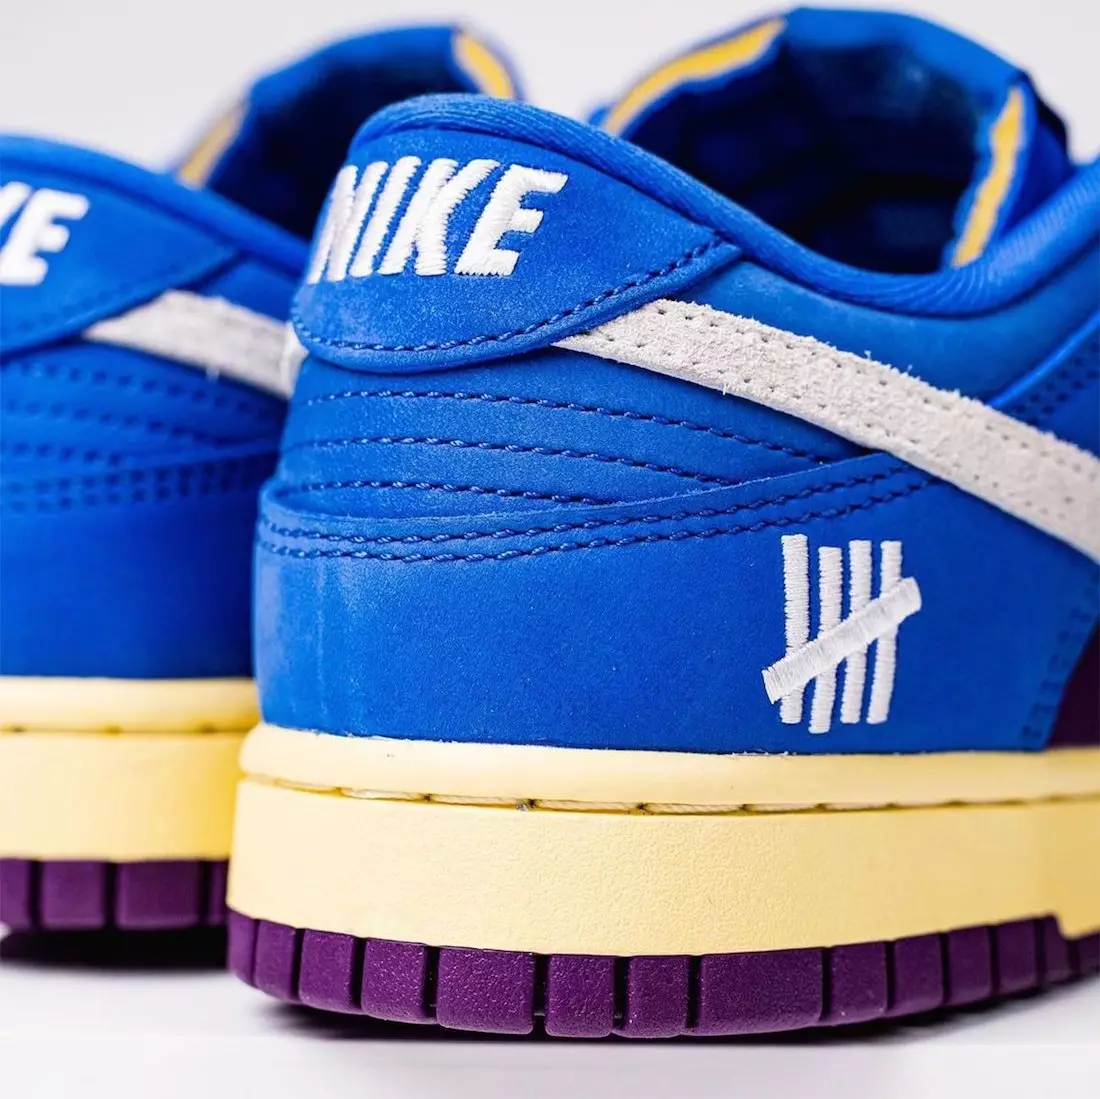 Undefeated Nike Dunk Low Blue Purple DH6508-400 Išleidimo data